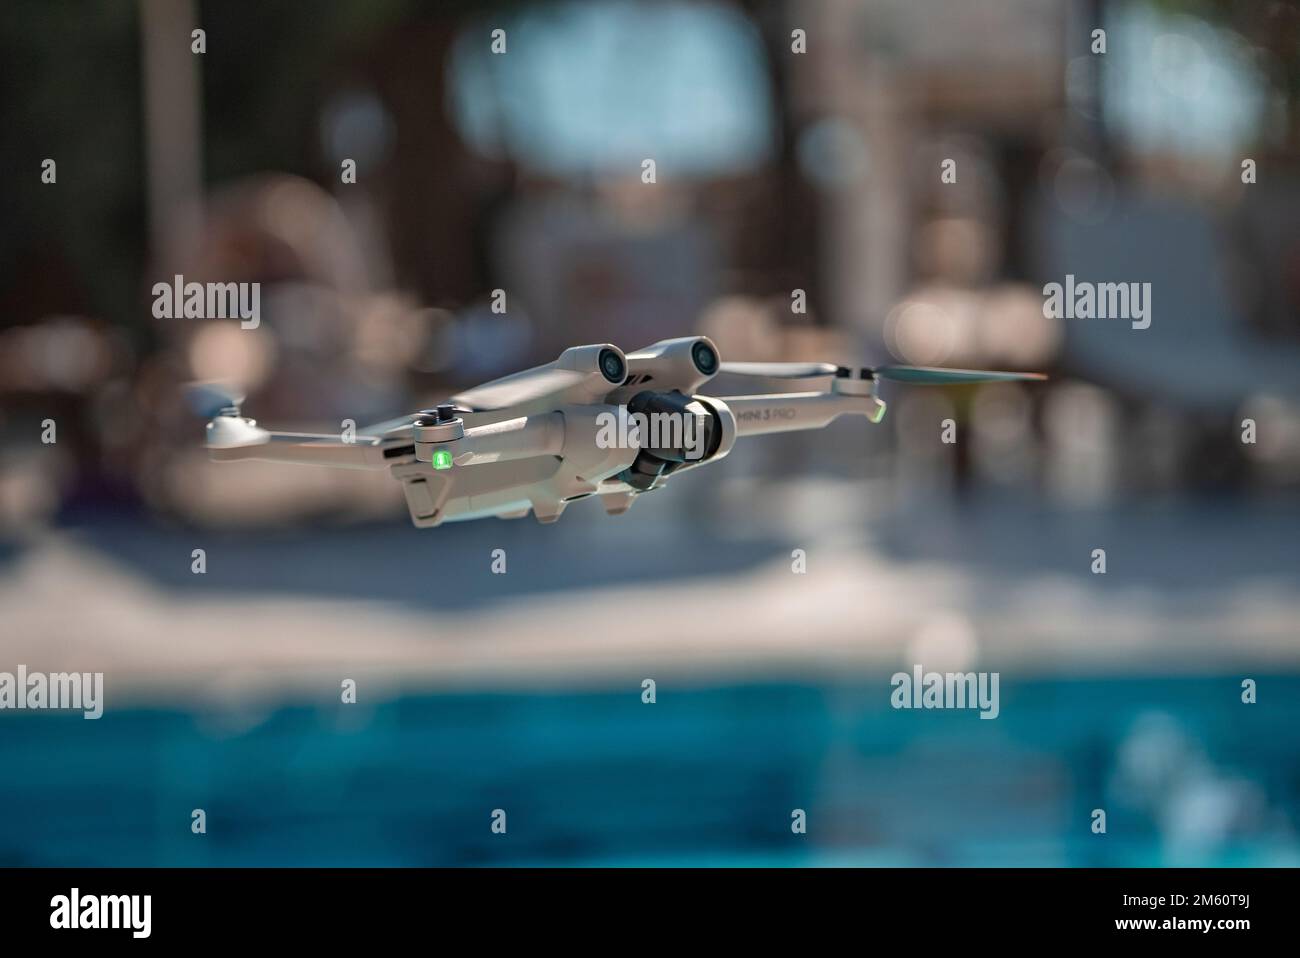 Close-up of quadcopter flying in air Stock Photo